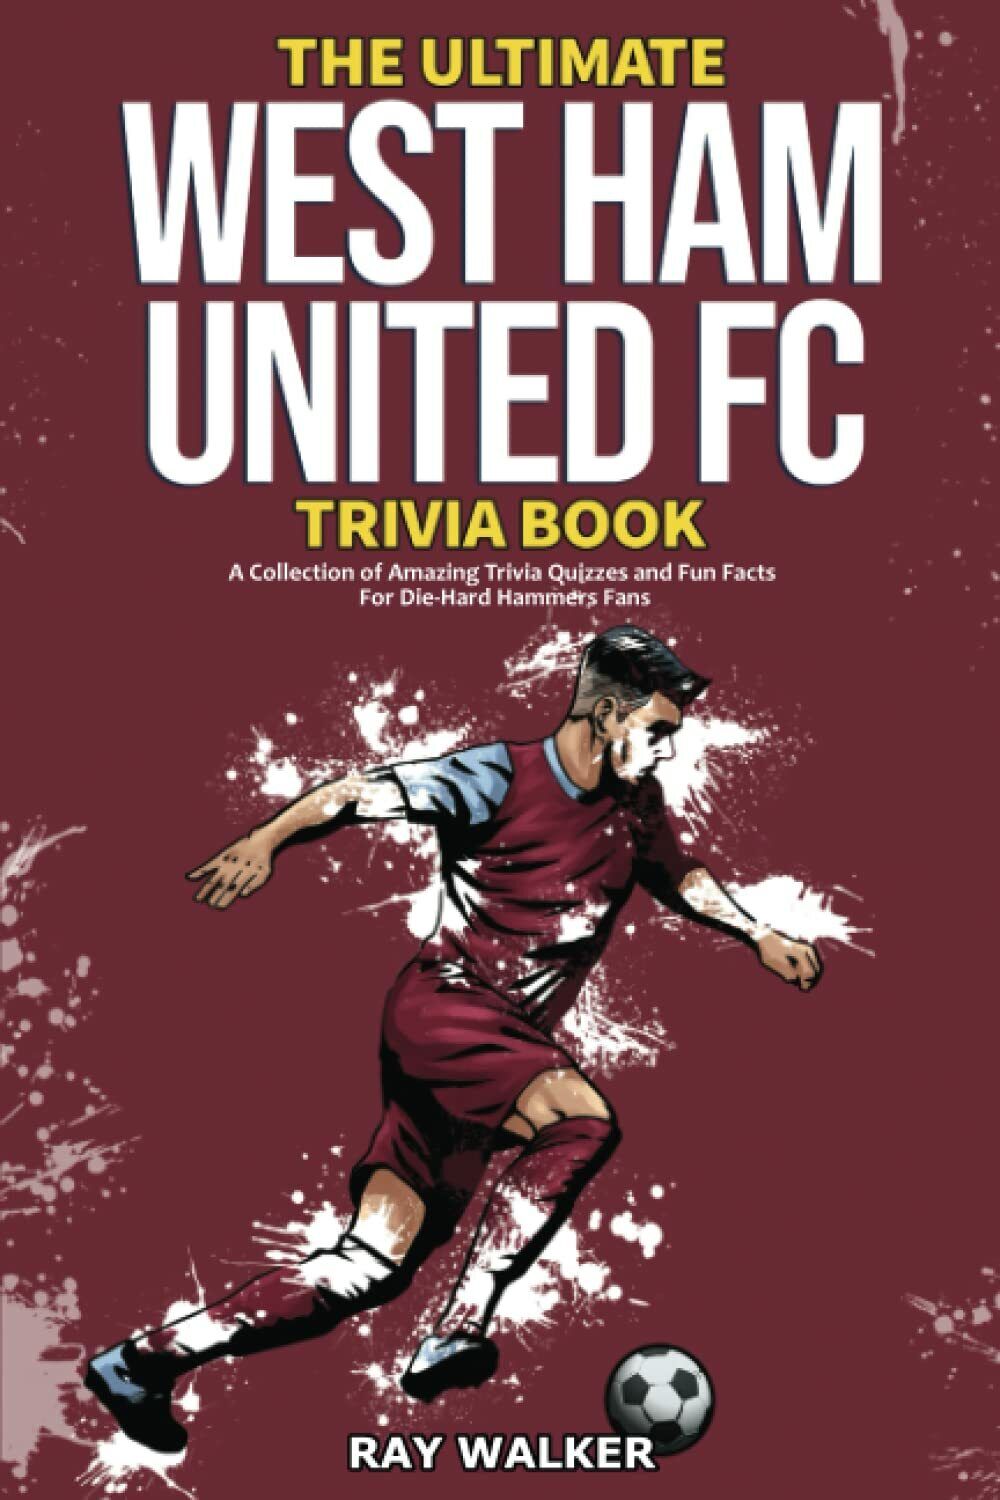 The Ultimate West Ham United Trivia Book - RAY WALKER - HRP House, 2021